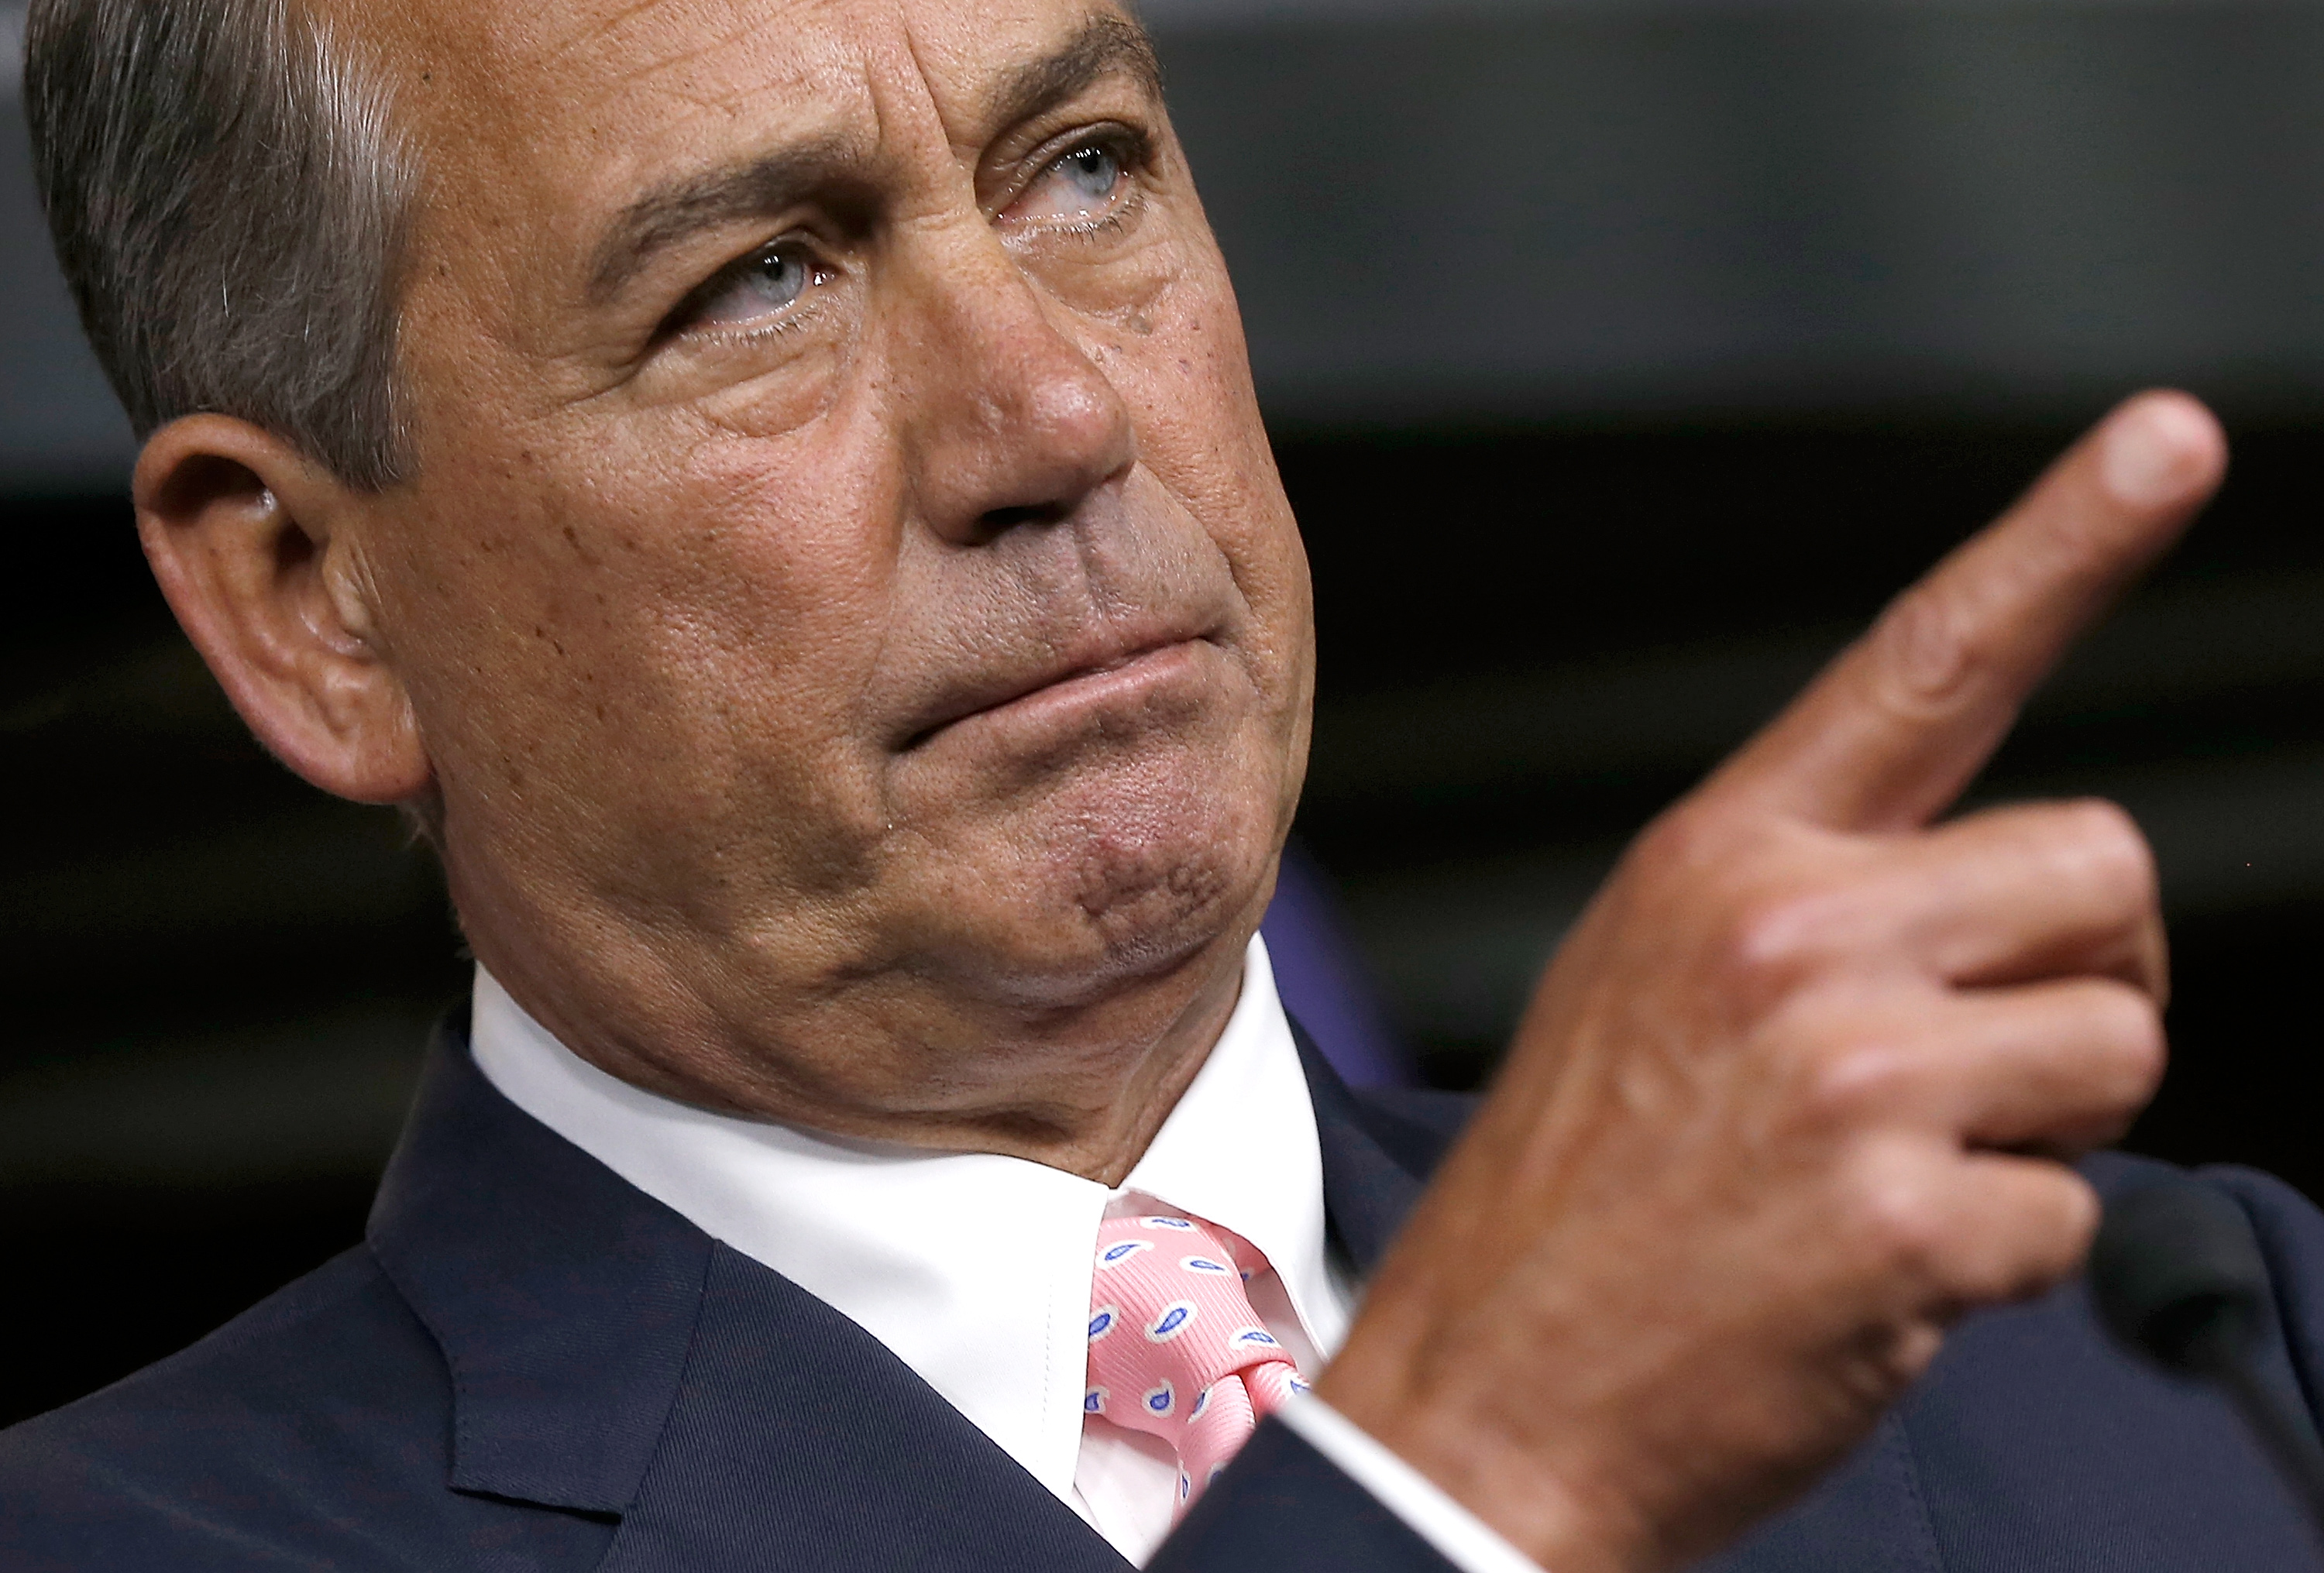 U.S. Speaker of the House John Boehner (R-OH) answers questions during a press conference at the U.S. Capitol July 24, 2014 in Washington, D.C. (Win McNamee—;Getty Images)